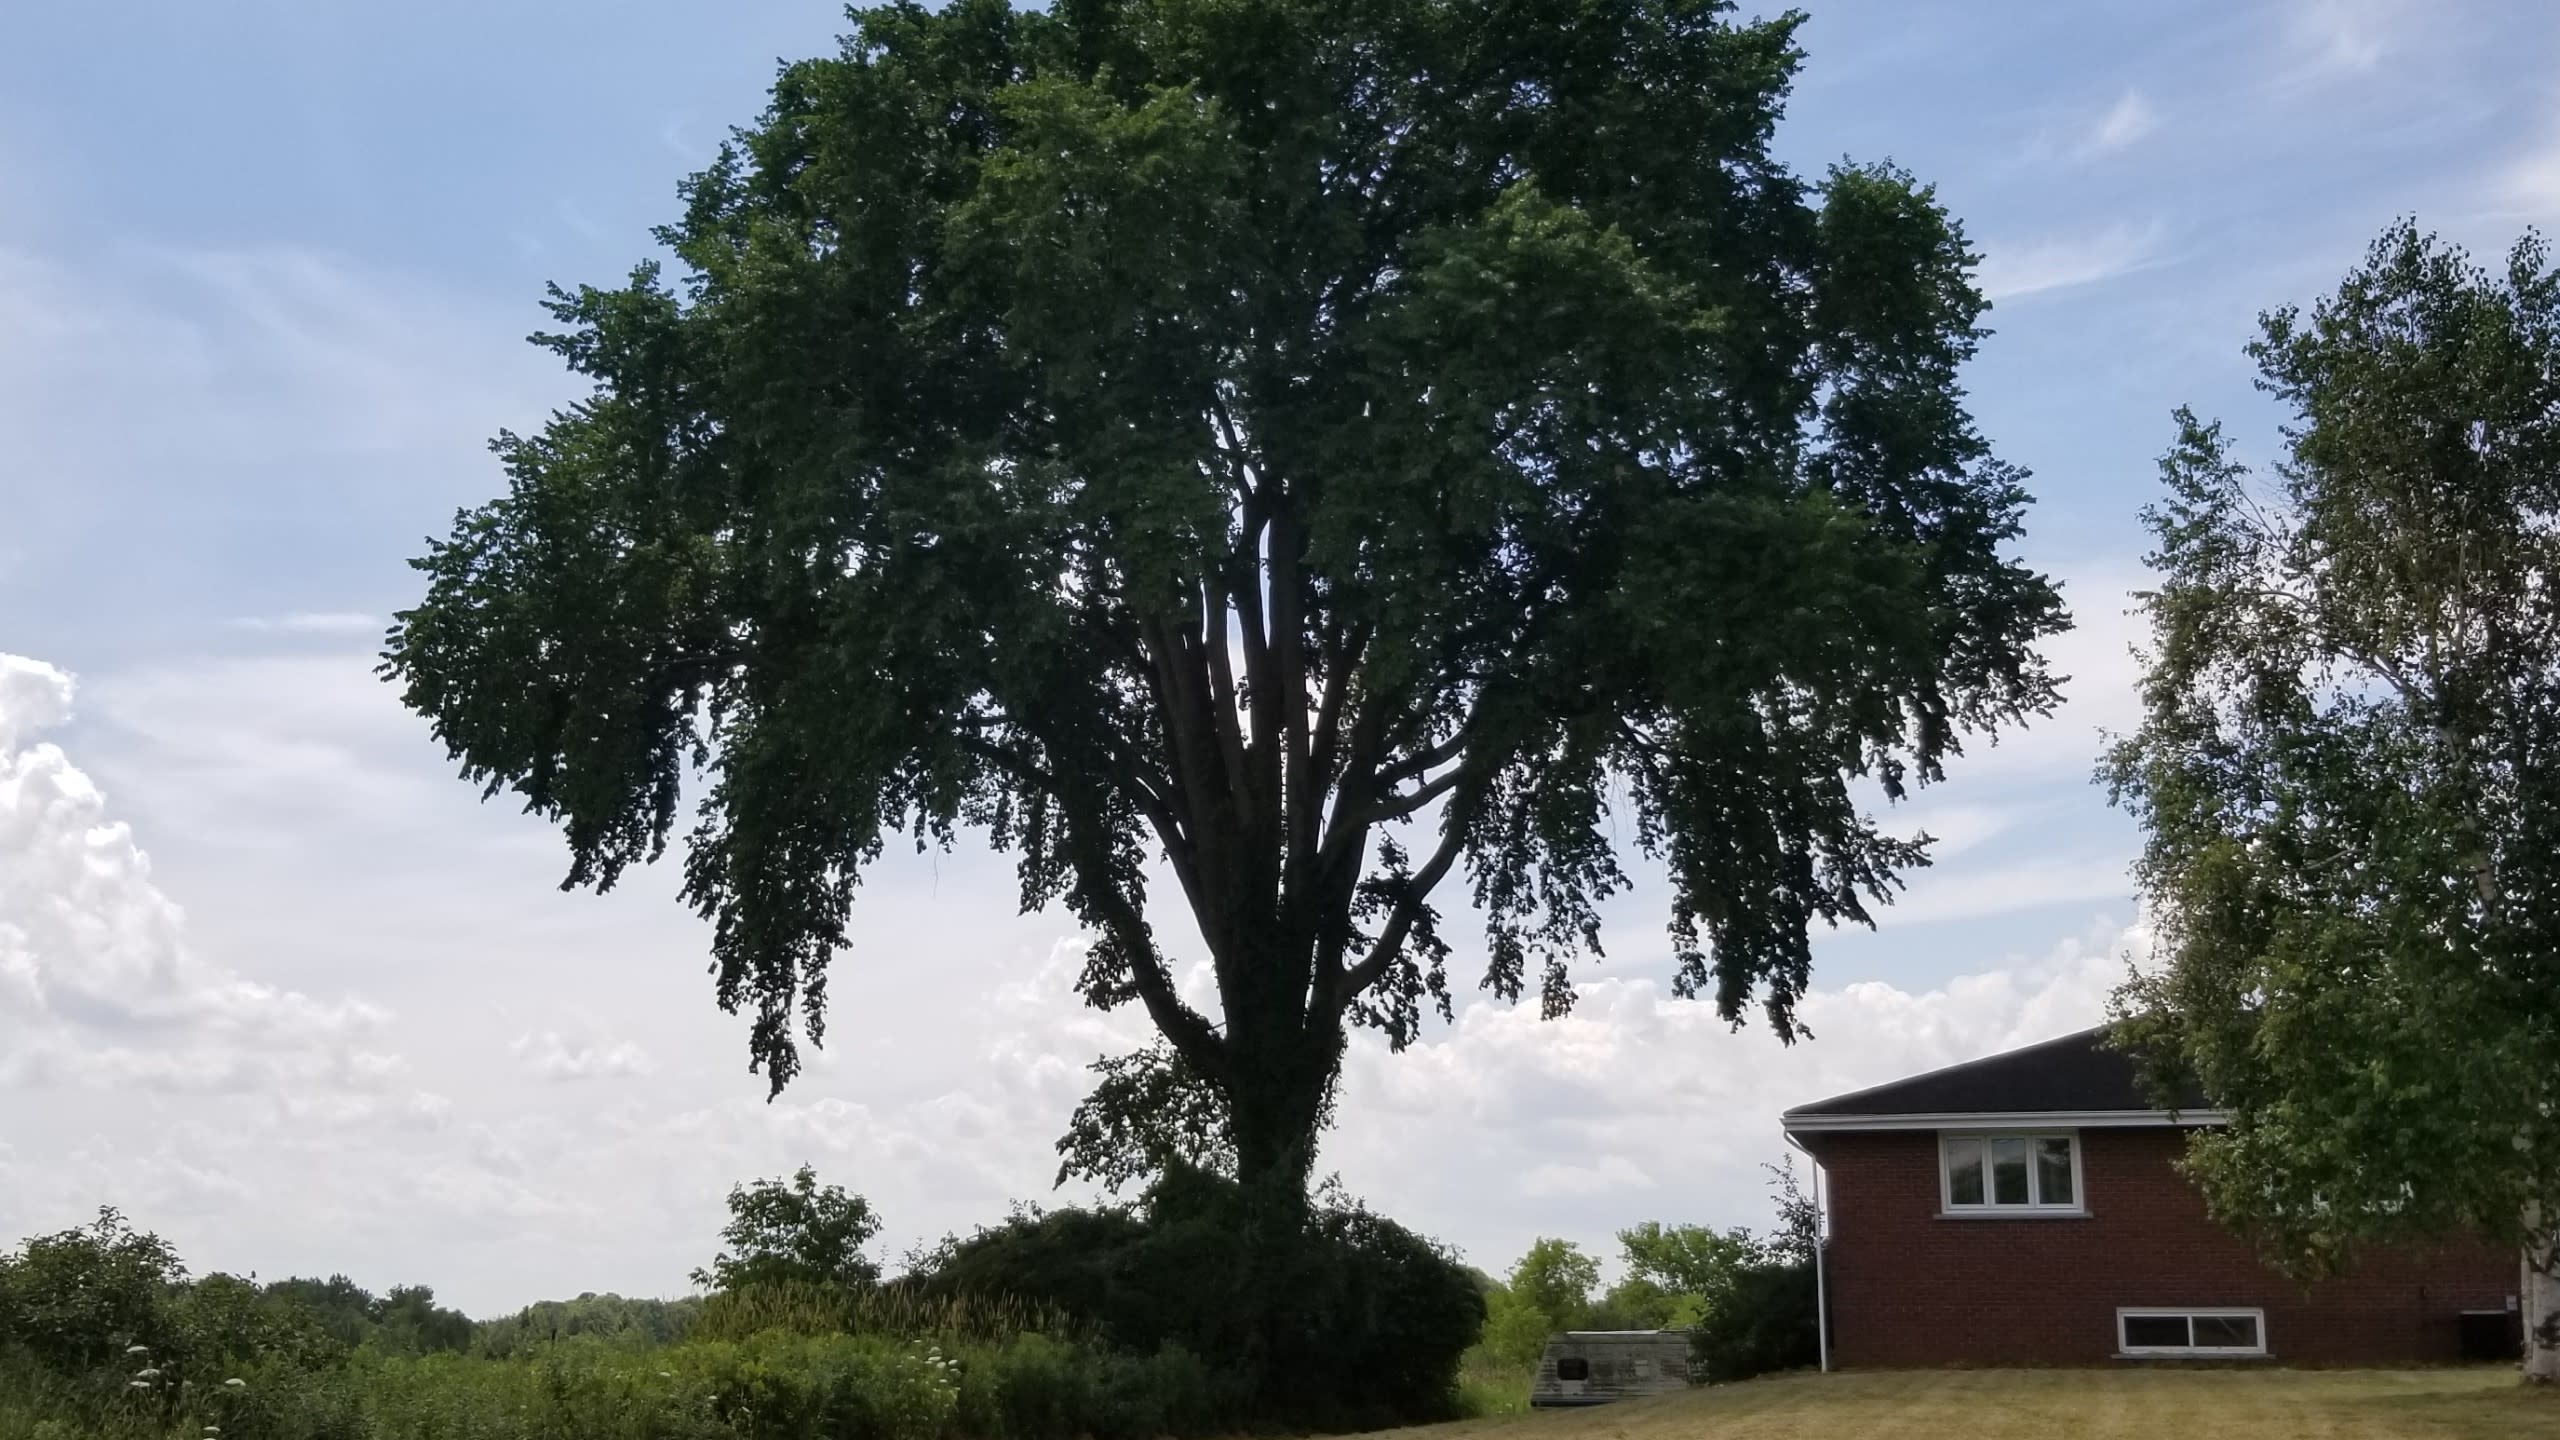 Image is of a large elm tree, beside a house.